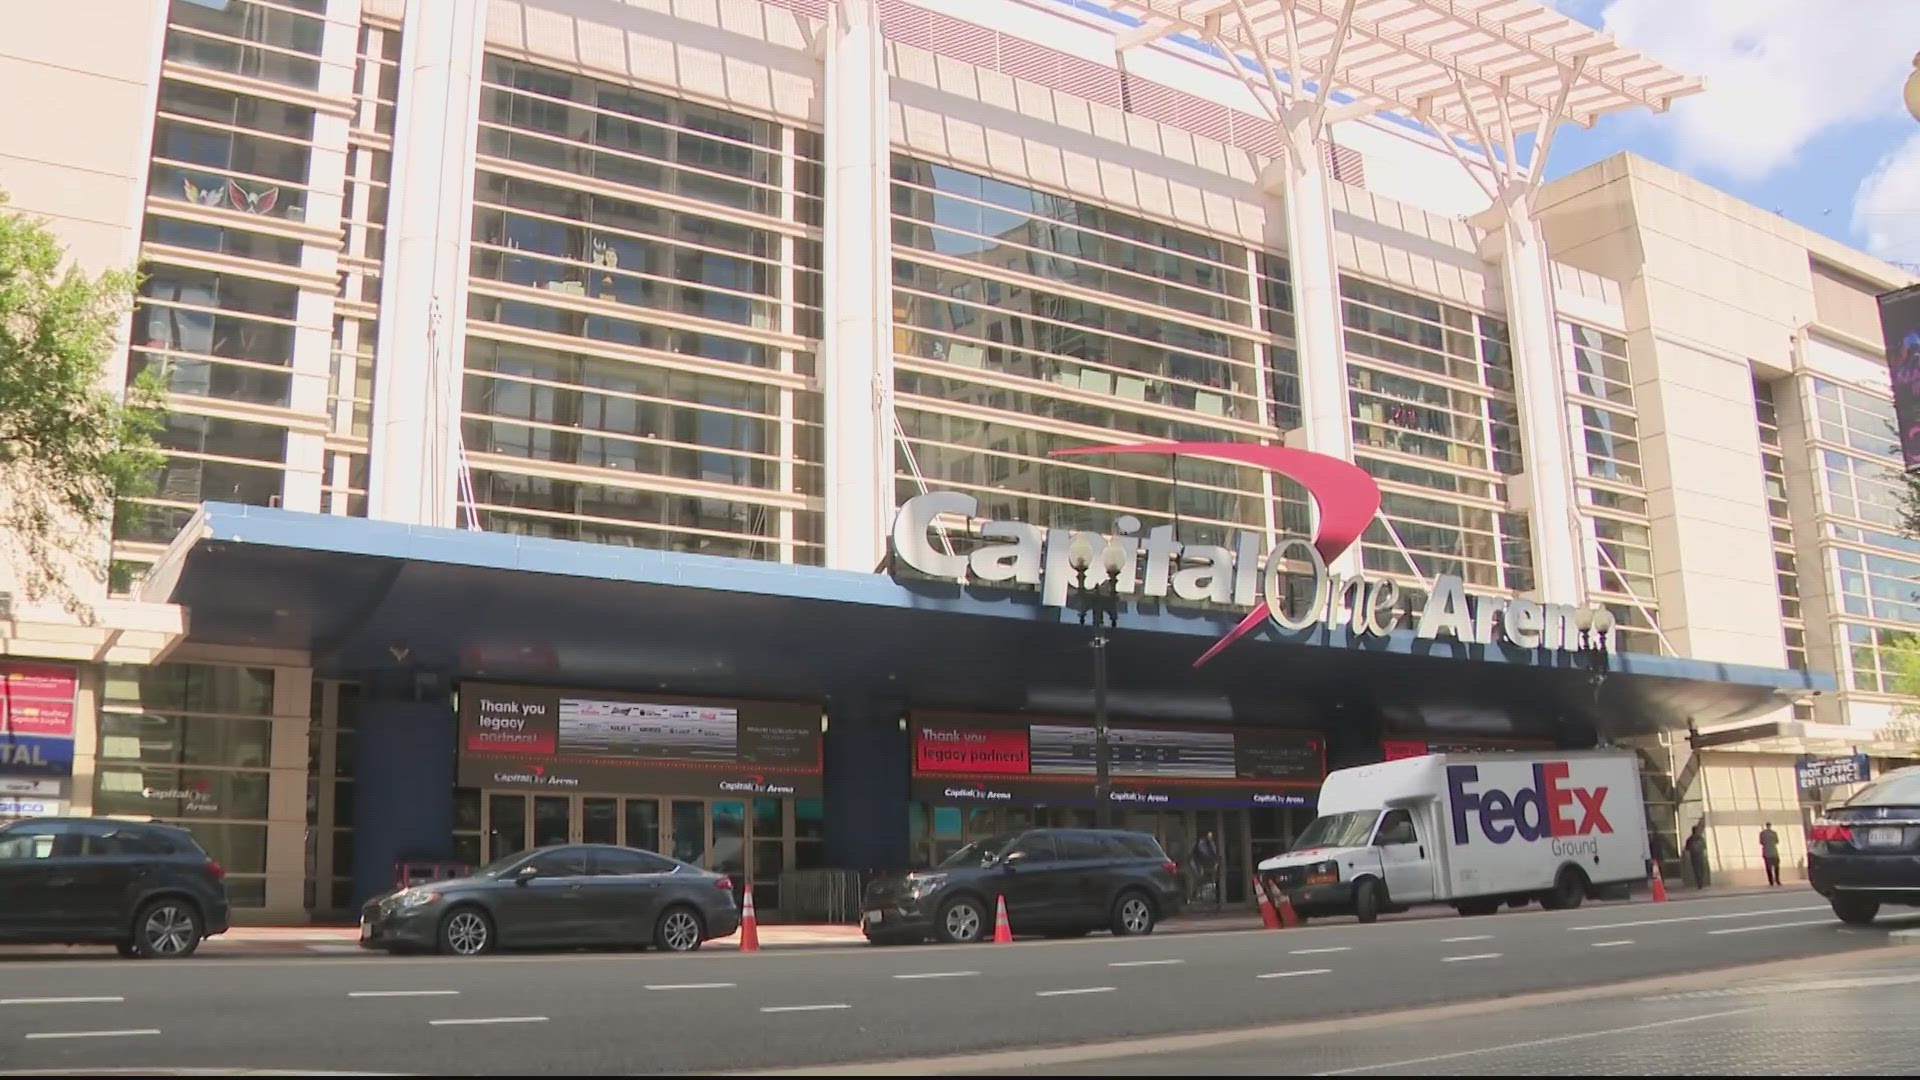 Monumental Sports and the Nationals are asking for millions in upgrades as some on the DC Council turn their attention to new Commanders stadium.